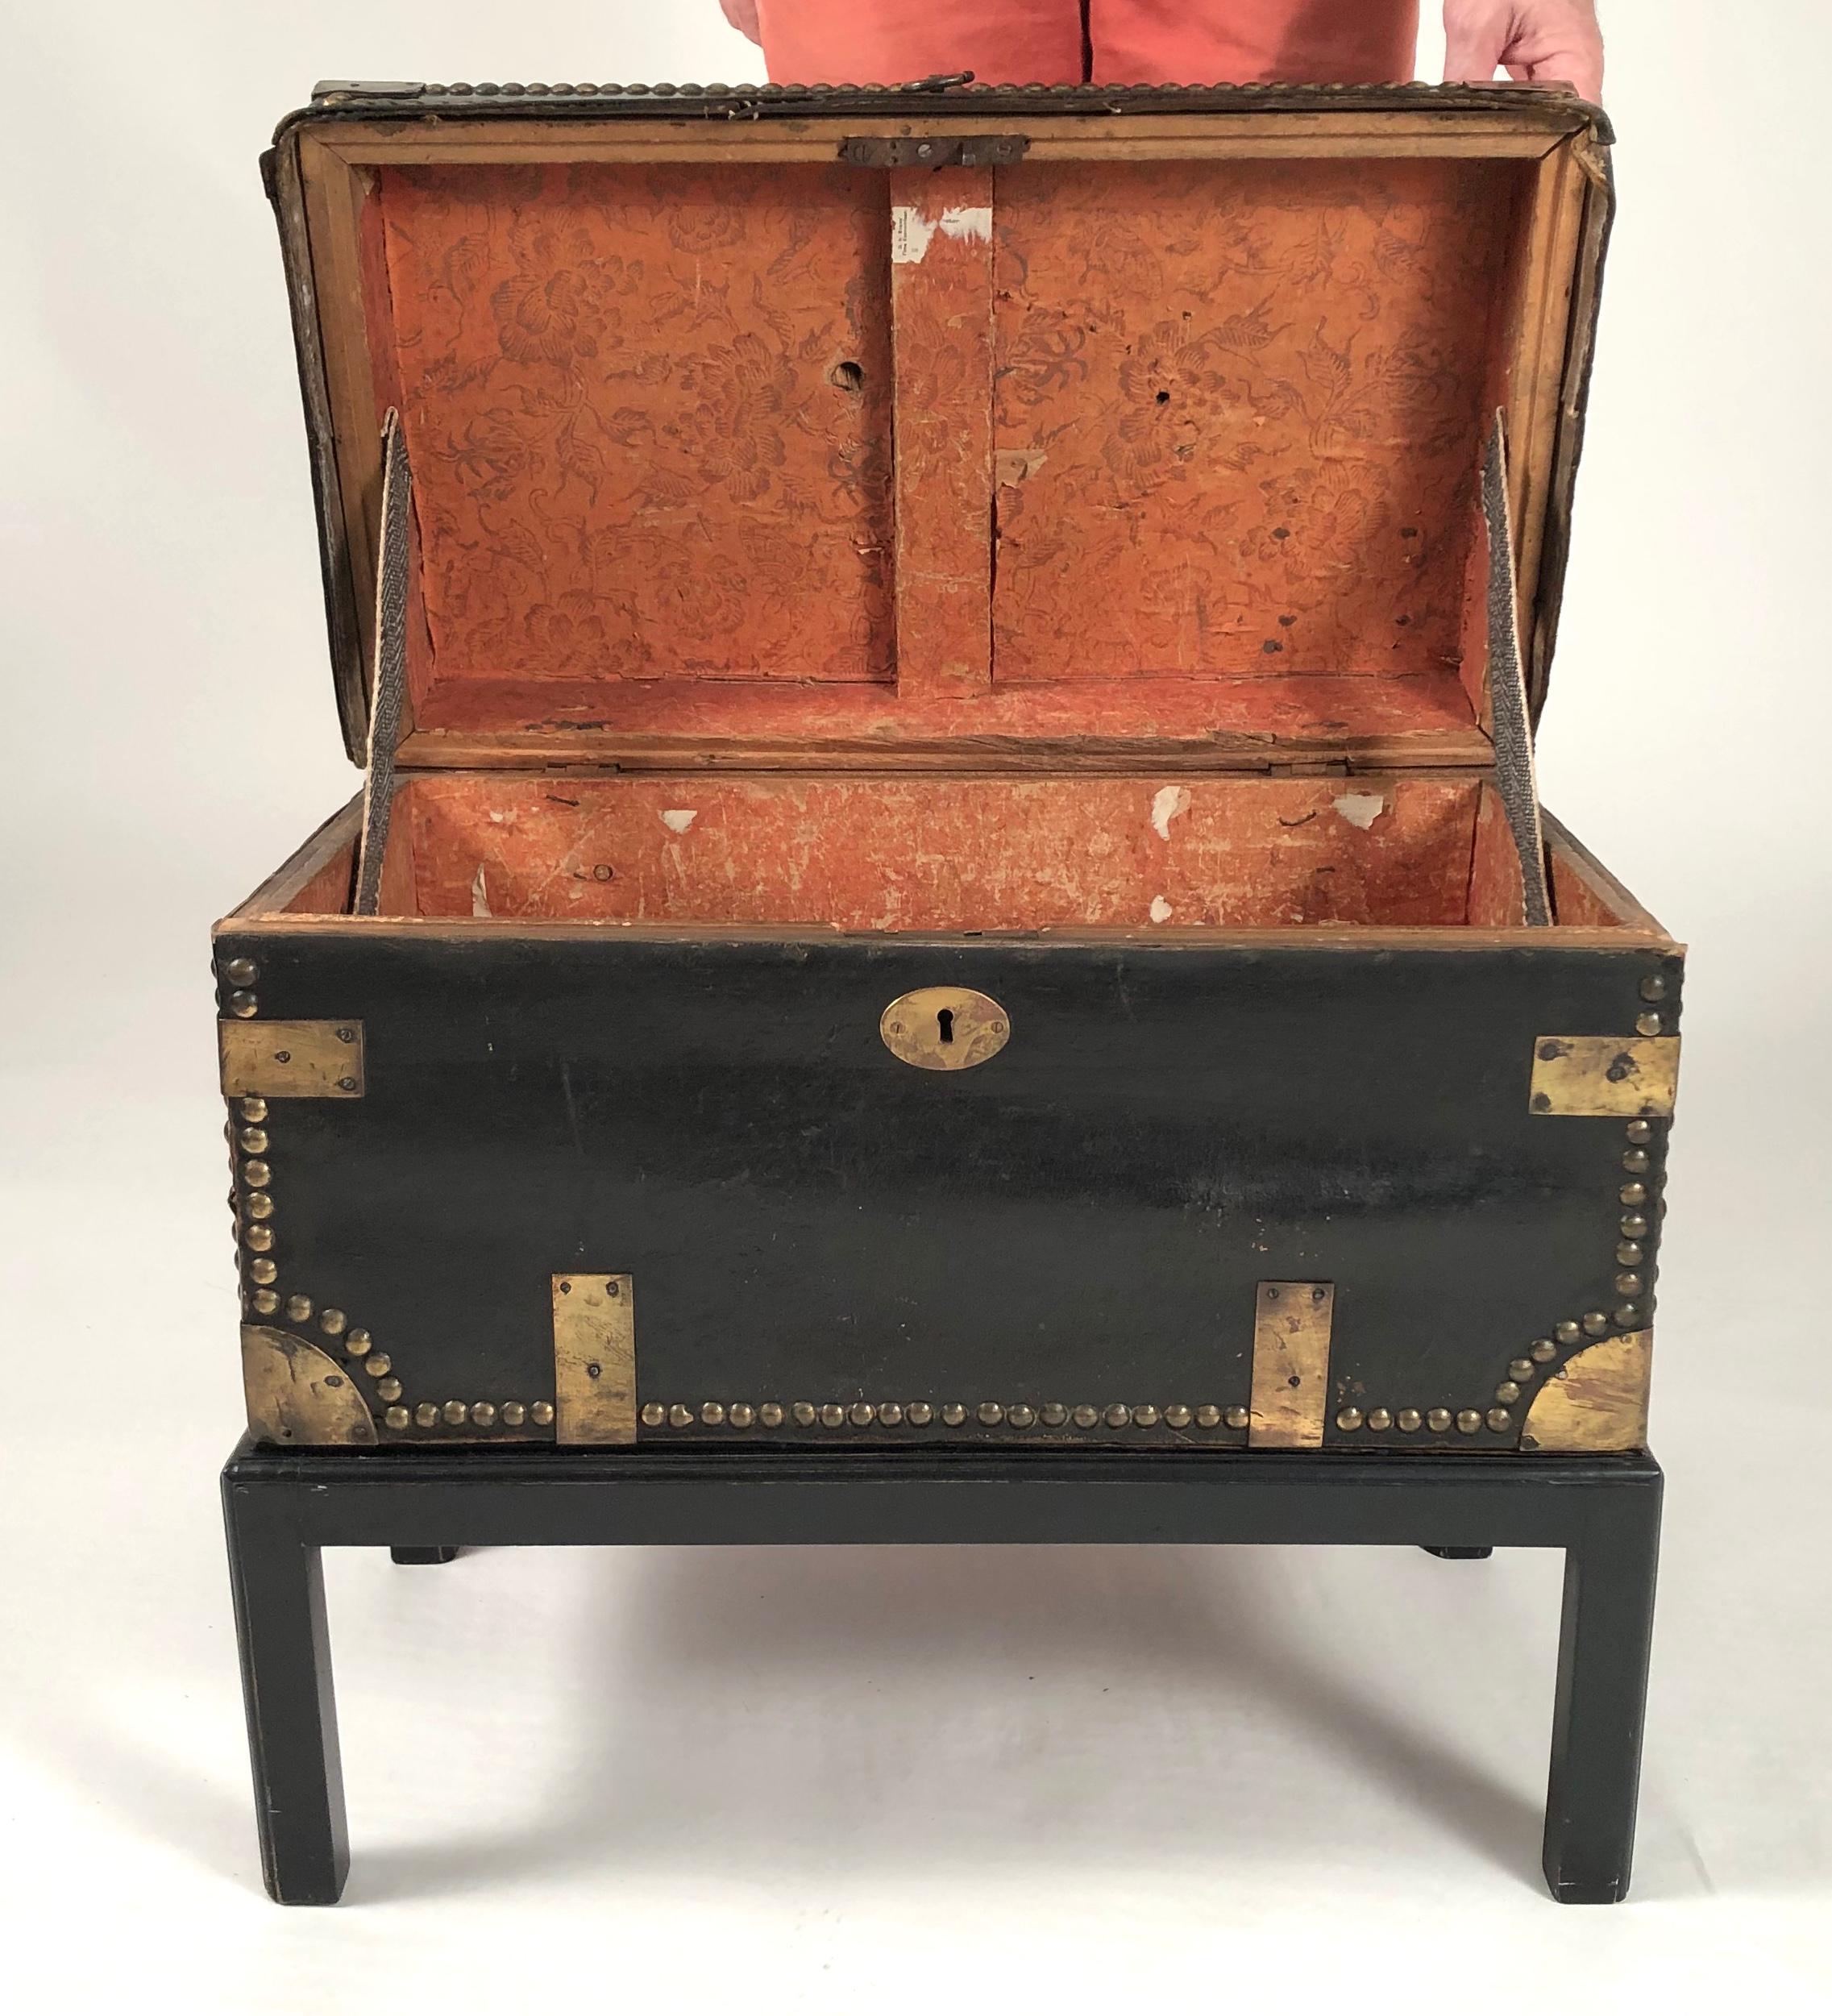 19th Century Brass Stud Decorated Leather Sea Captain's Chest on Stand, circa 1810-1820